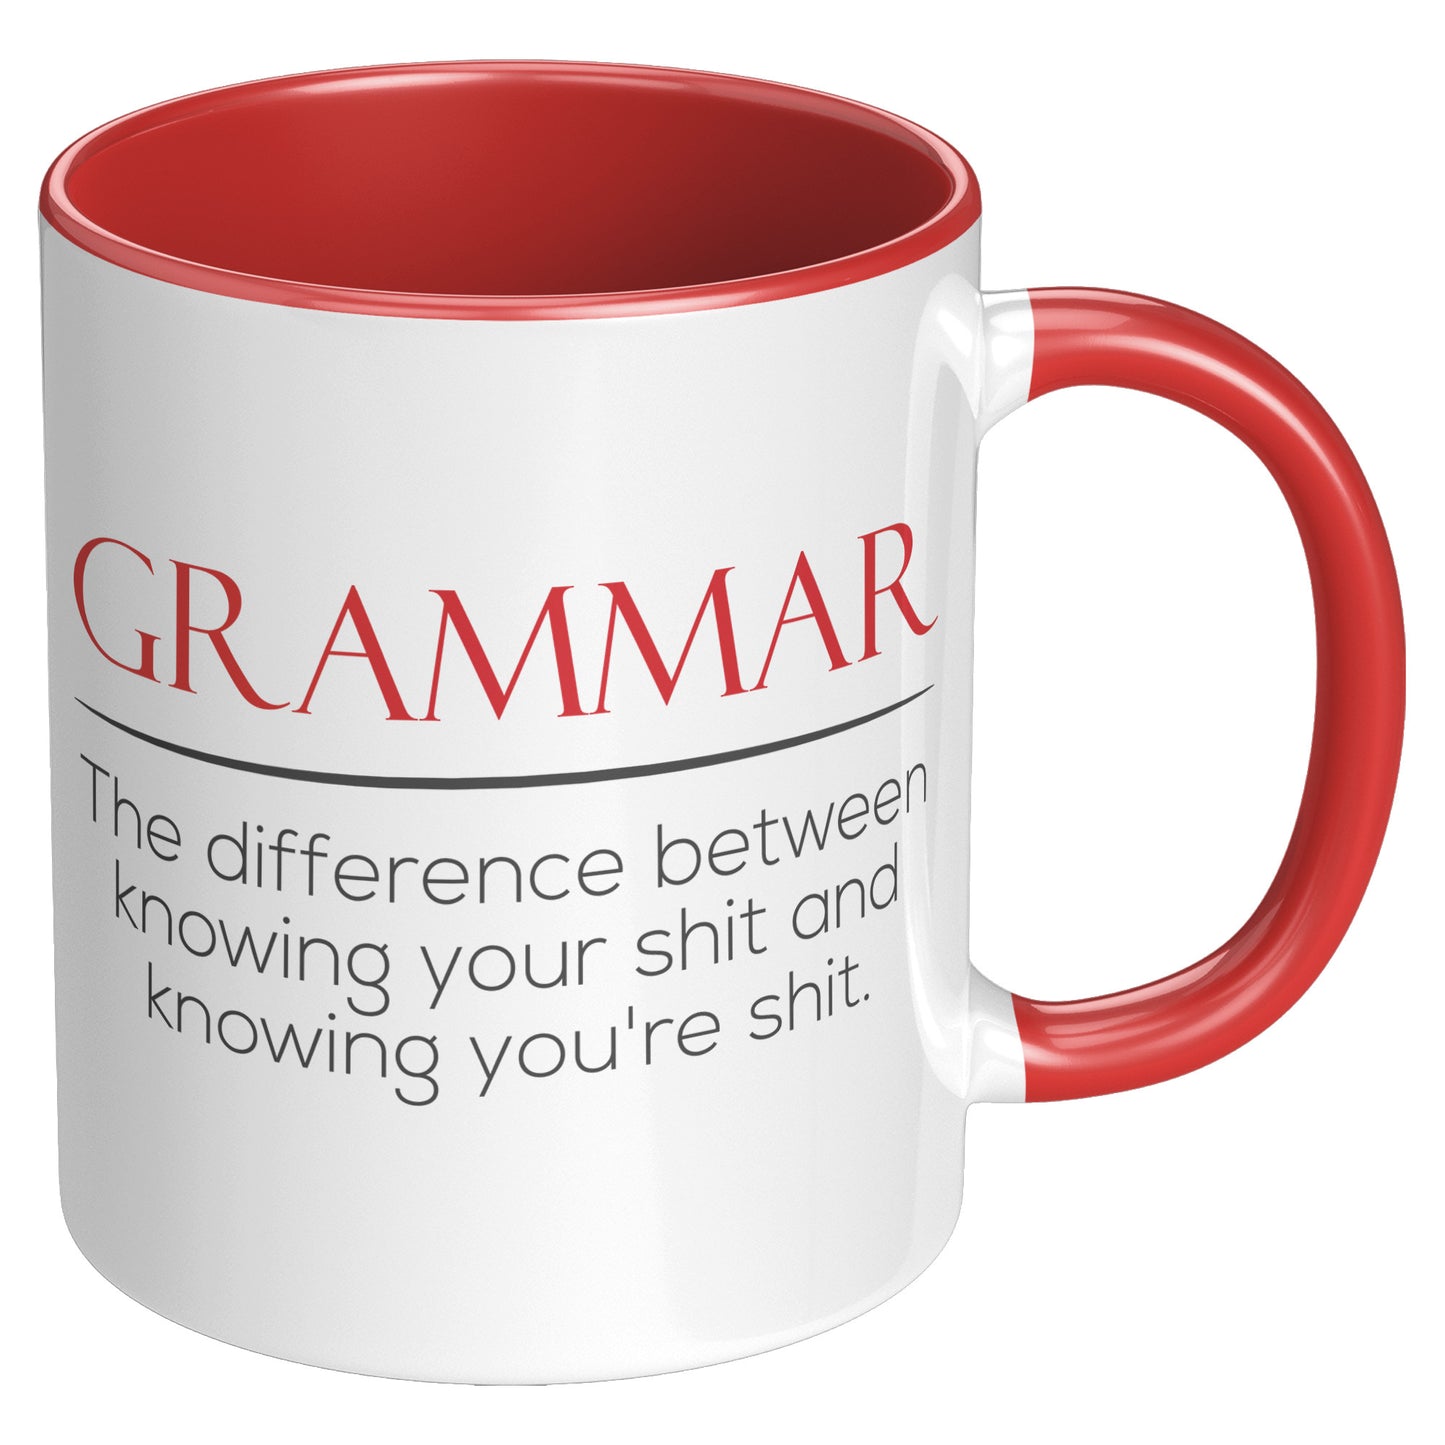 Grammar The Difference Between Knowing Your Shit And Knowing You're Shit | Accent Mug